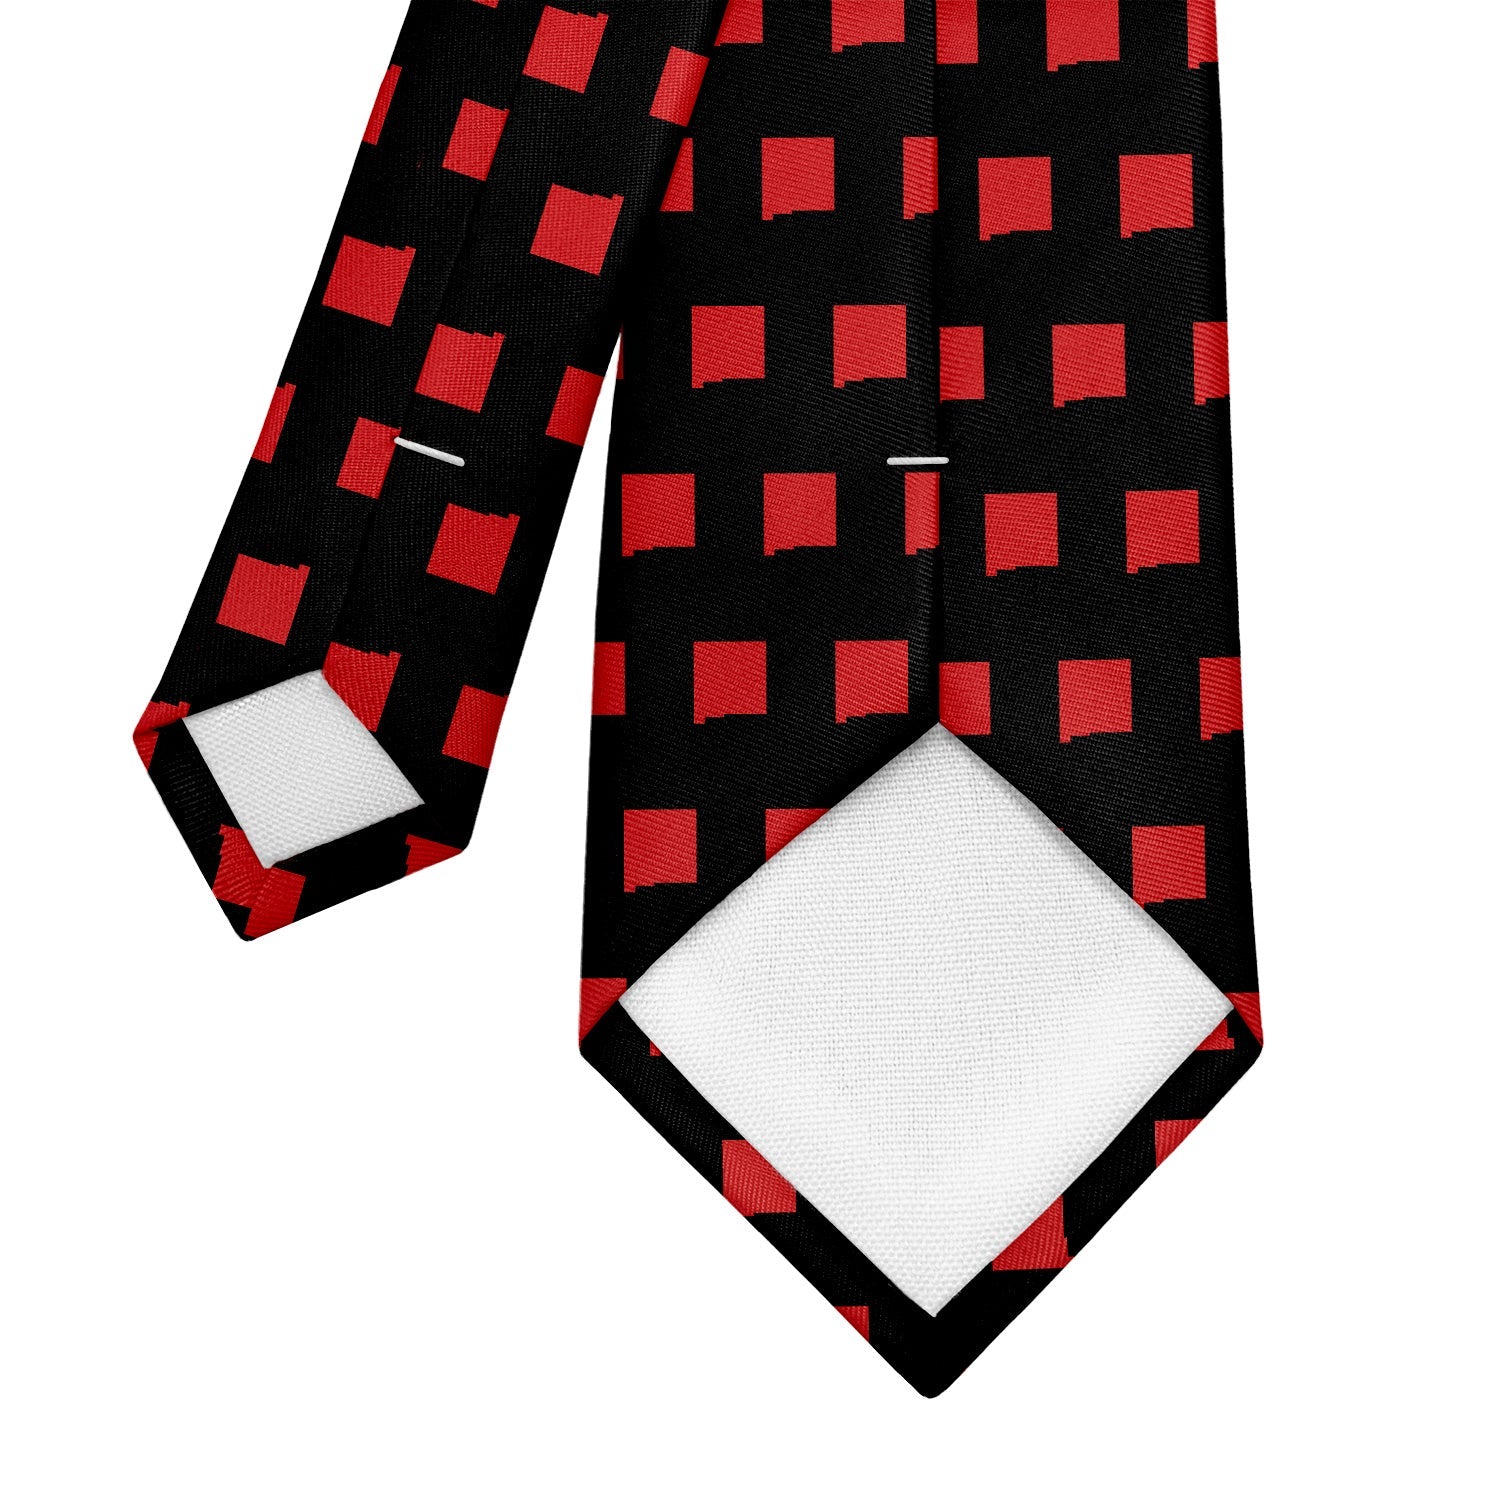 New Mexico State Outline Necktie - Tipping - Knotty Tie Co.